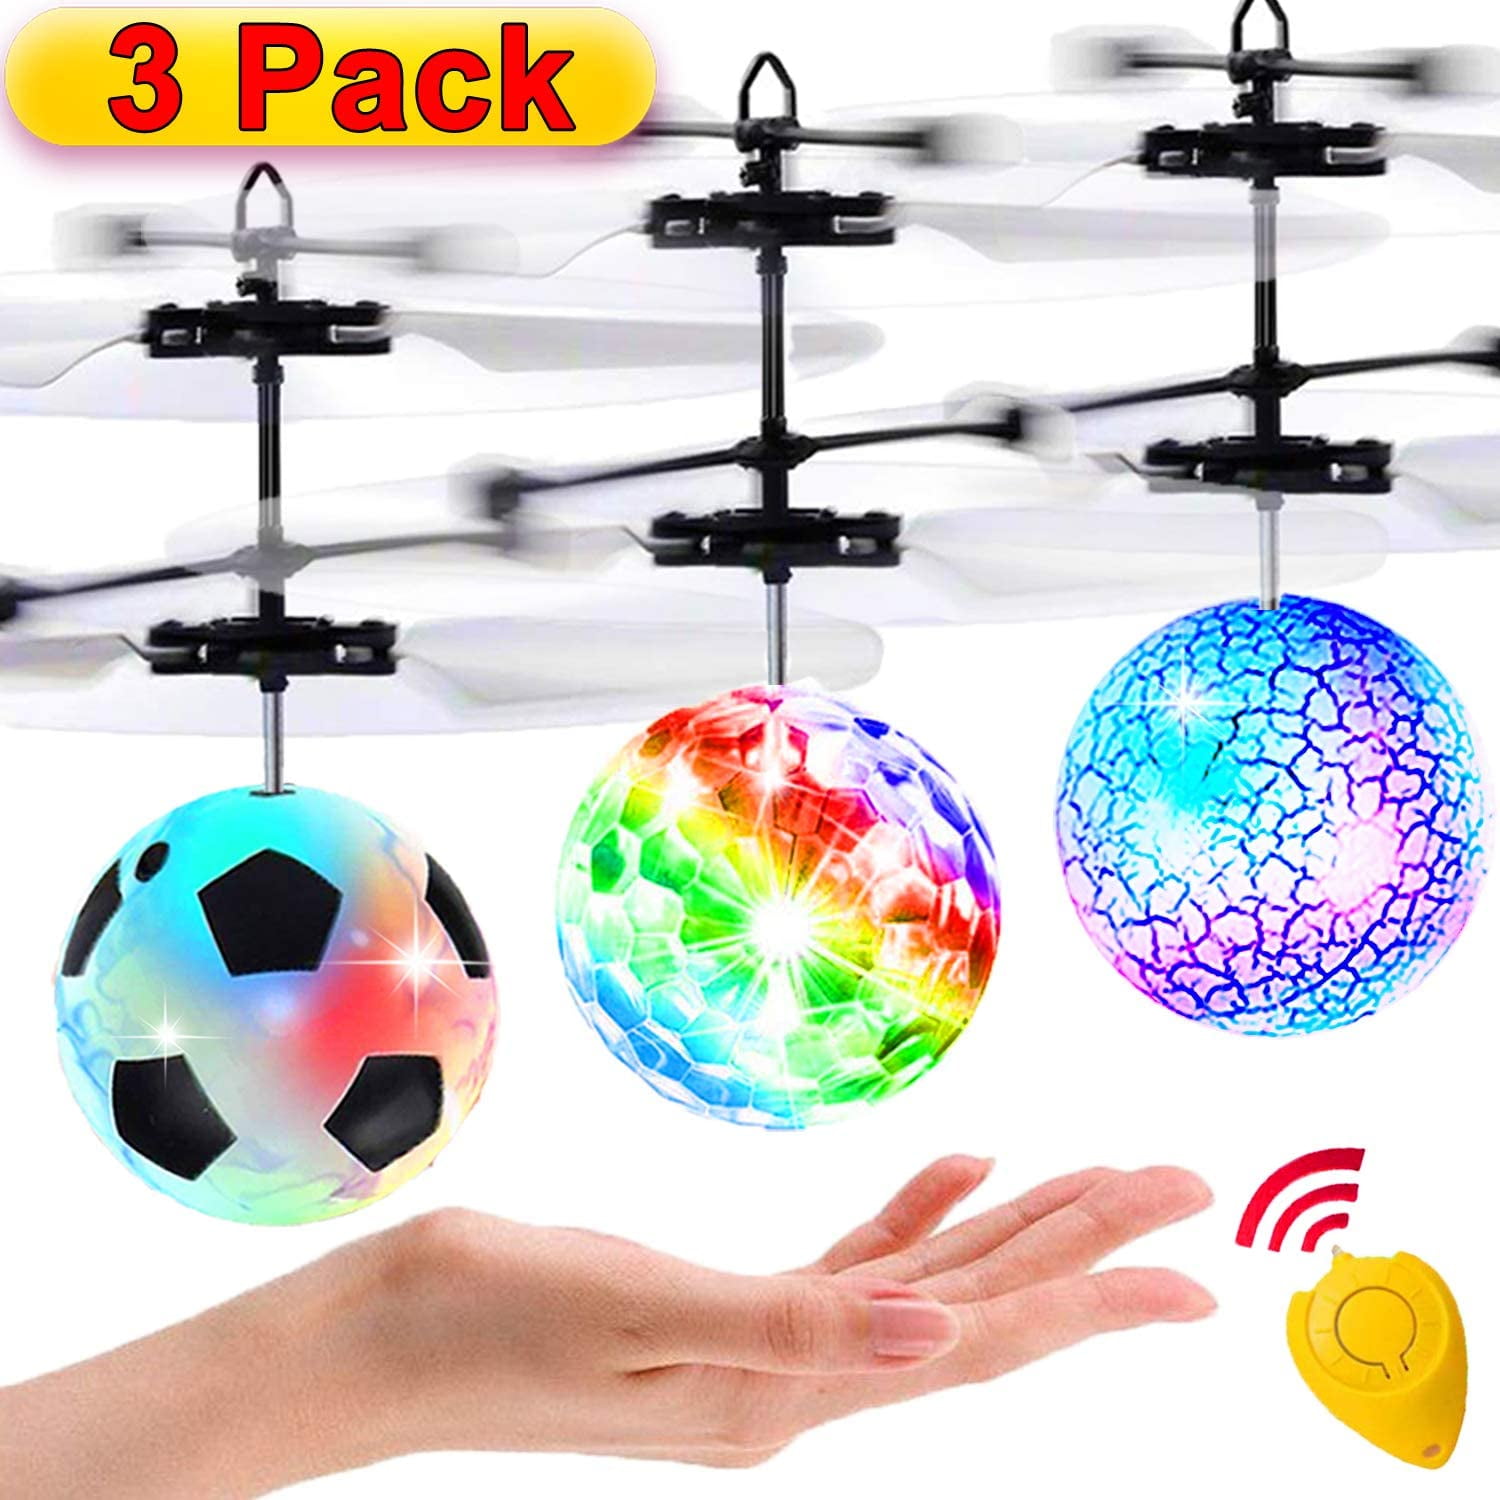 Induction Helicopter Mini Remote Control Flying Ball Toy for Kids 